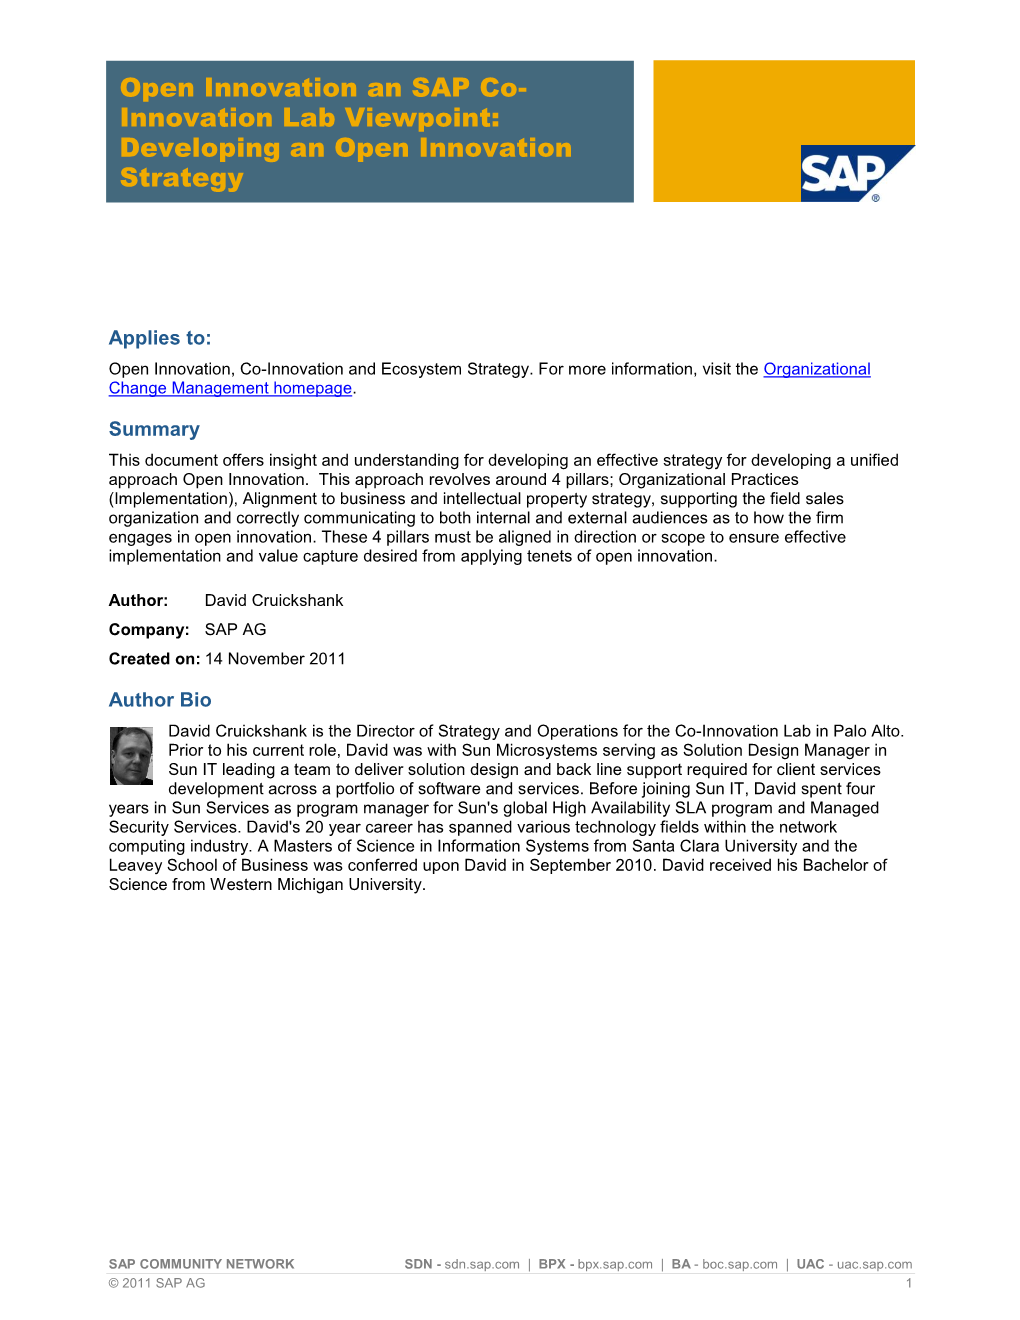 An SAP Co-Innovation Lab Viewpoint: Developing an Open Innovation Strategy